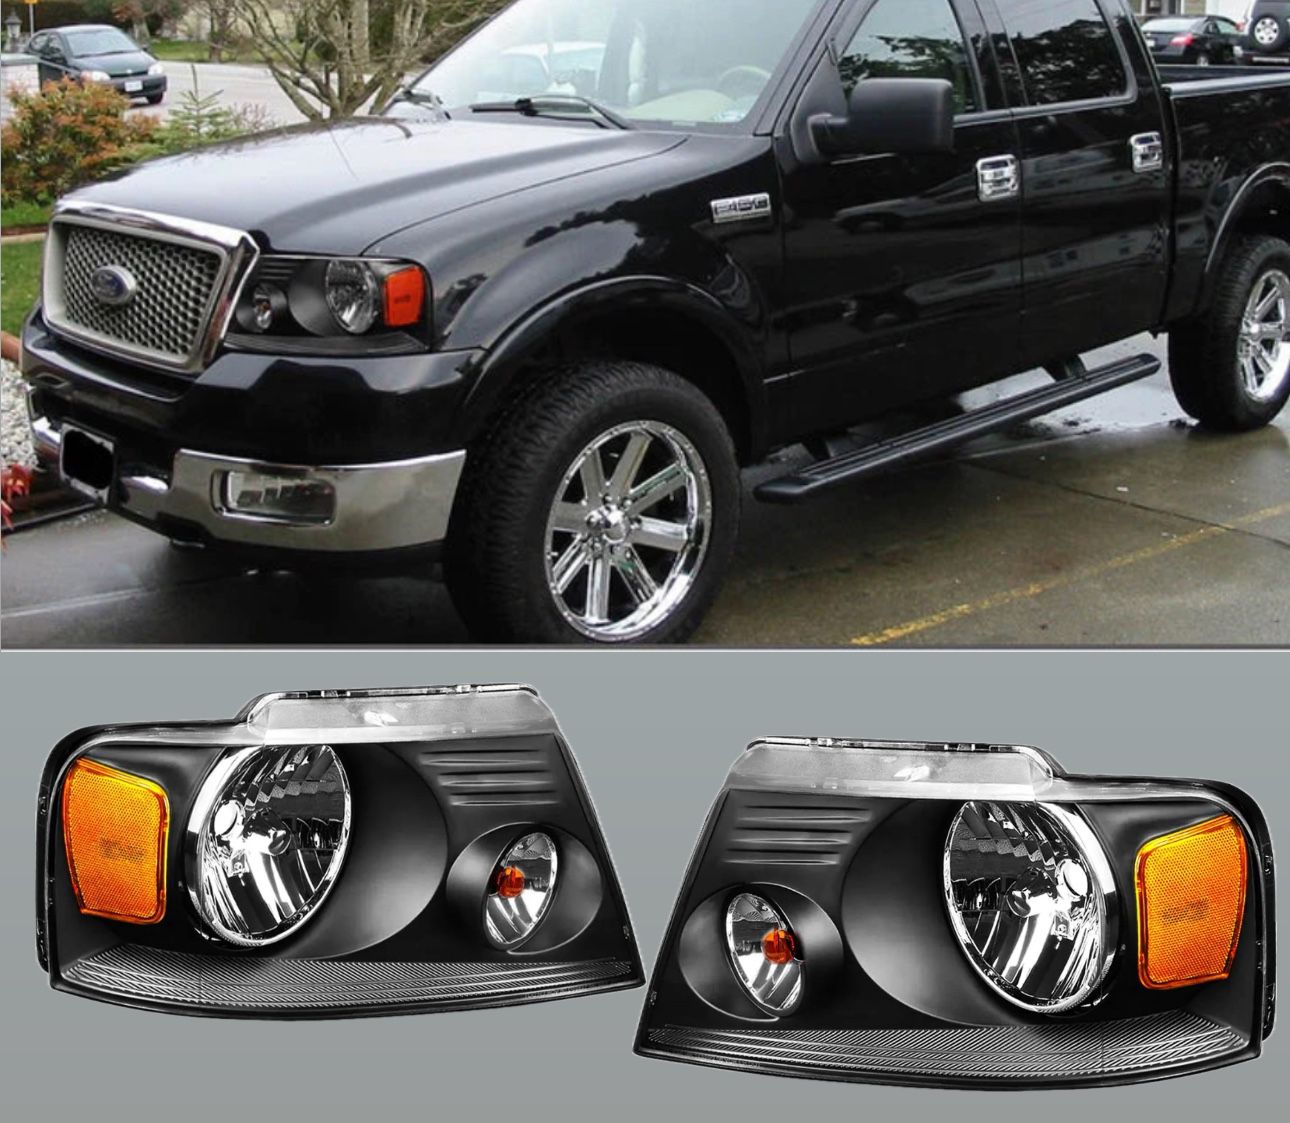 New Headlights for Ford F150 Black Housing with Clear lens Fits 2004 to 2008